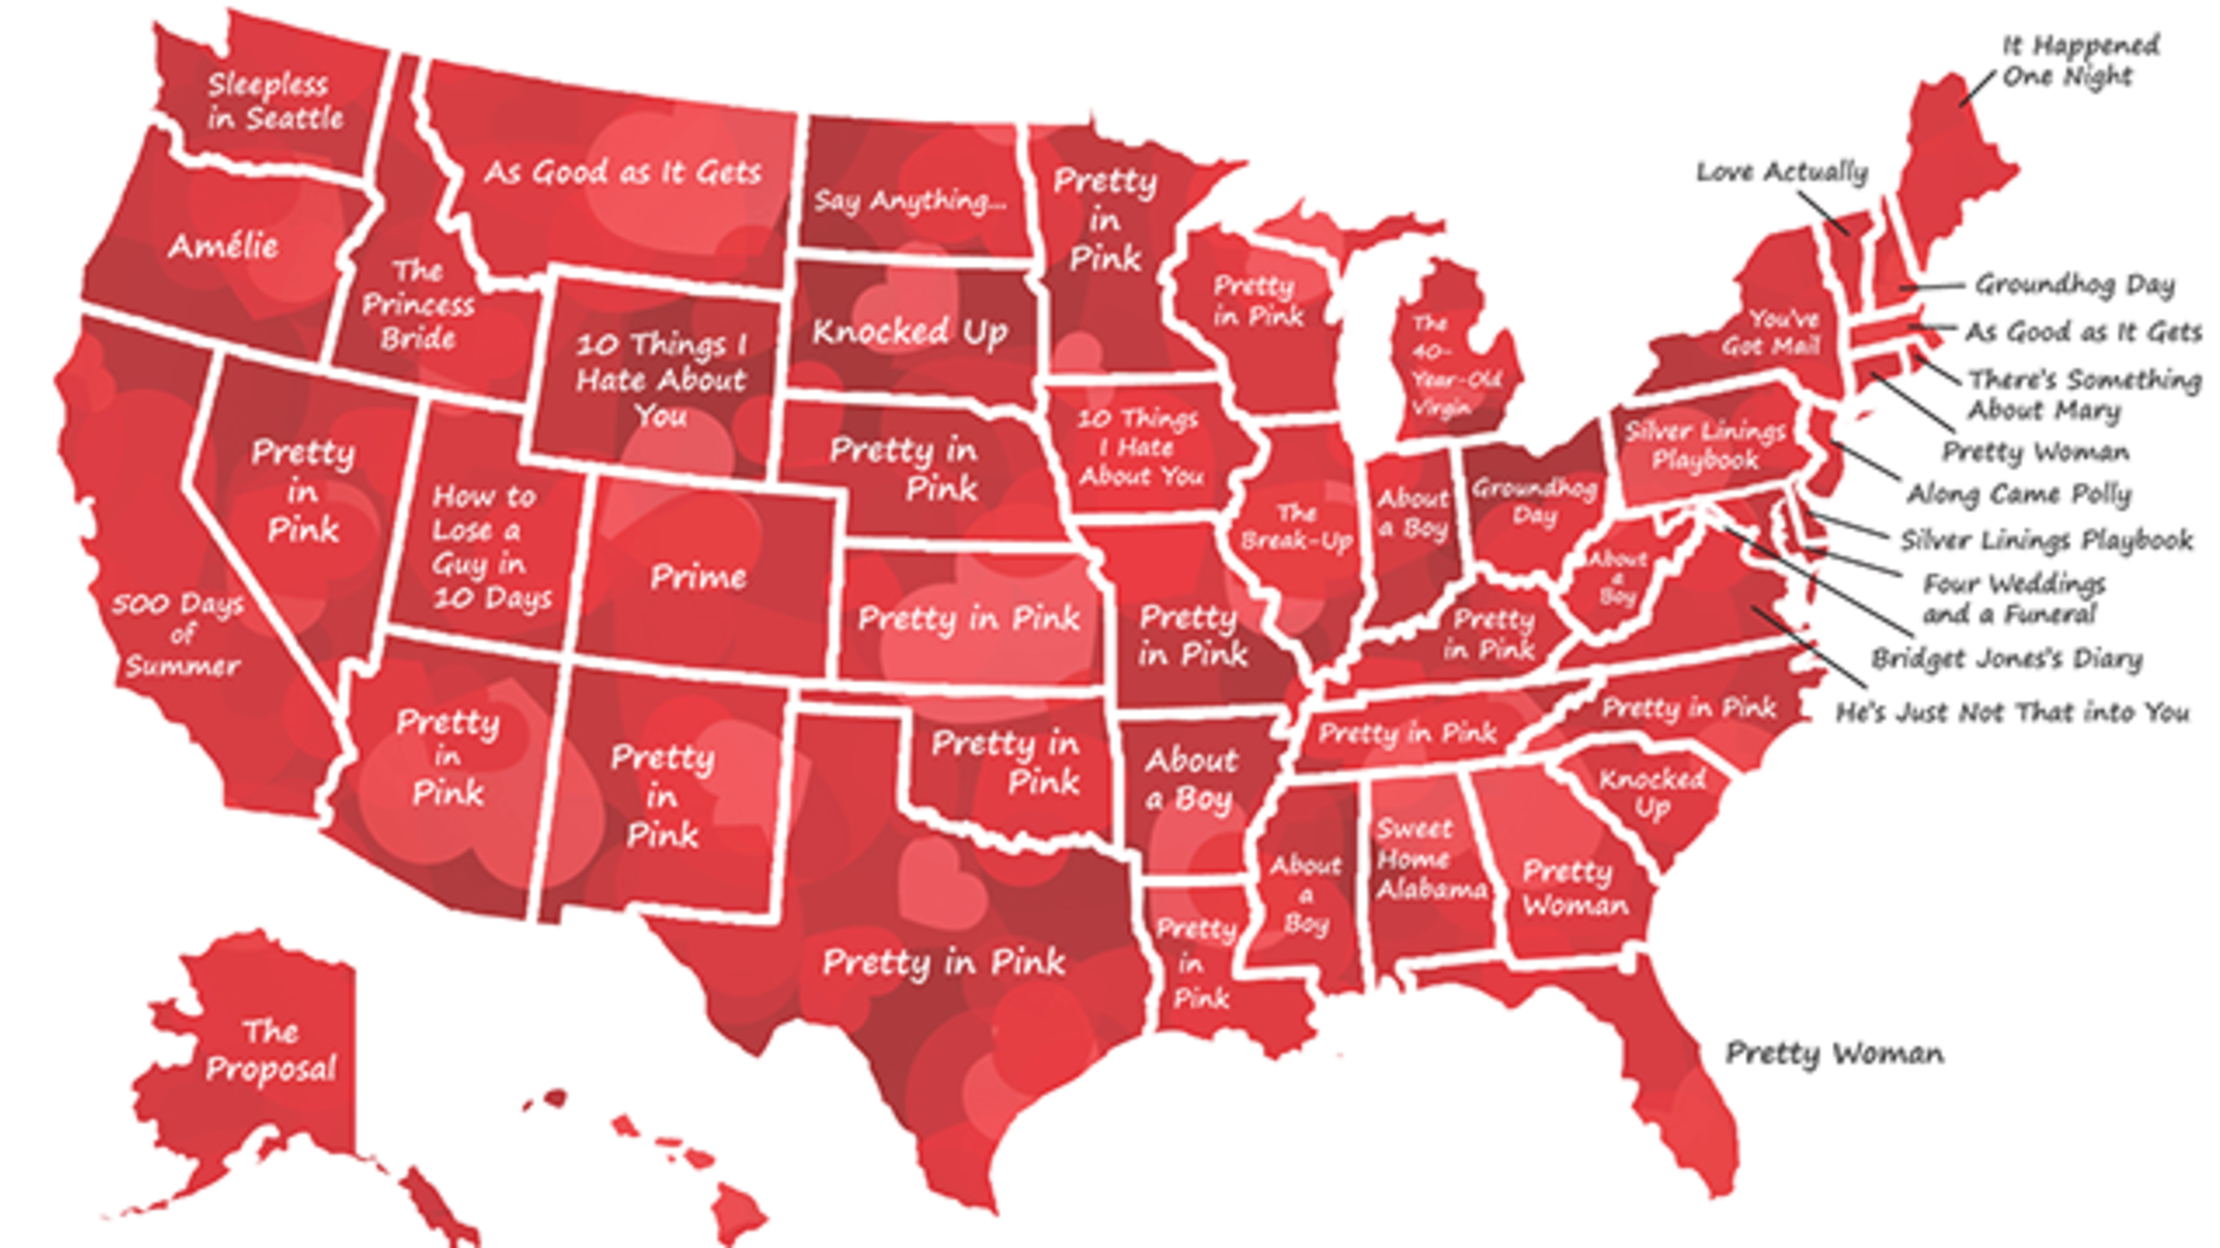 This Map Shows The Most Popular Rom Coms Across The Us Images and